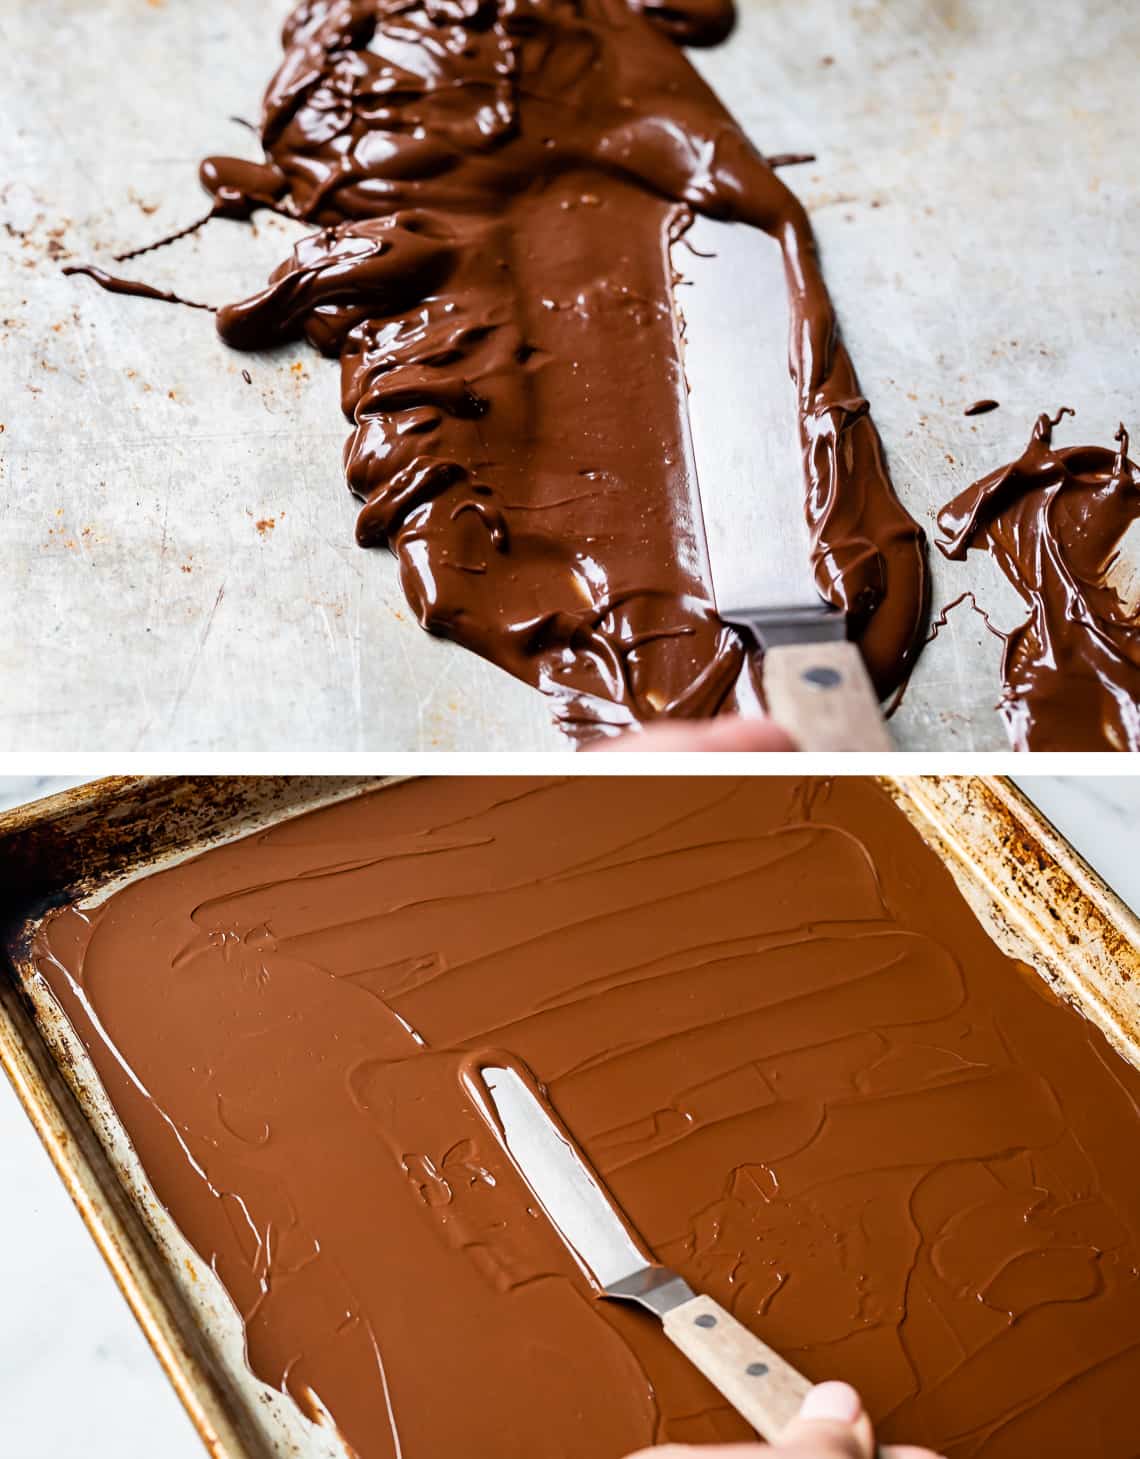 spreading chocolate on a pan with offset spatula, then the whole pan with chocolate spread out.